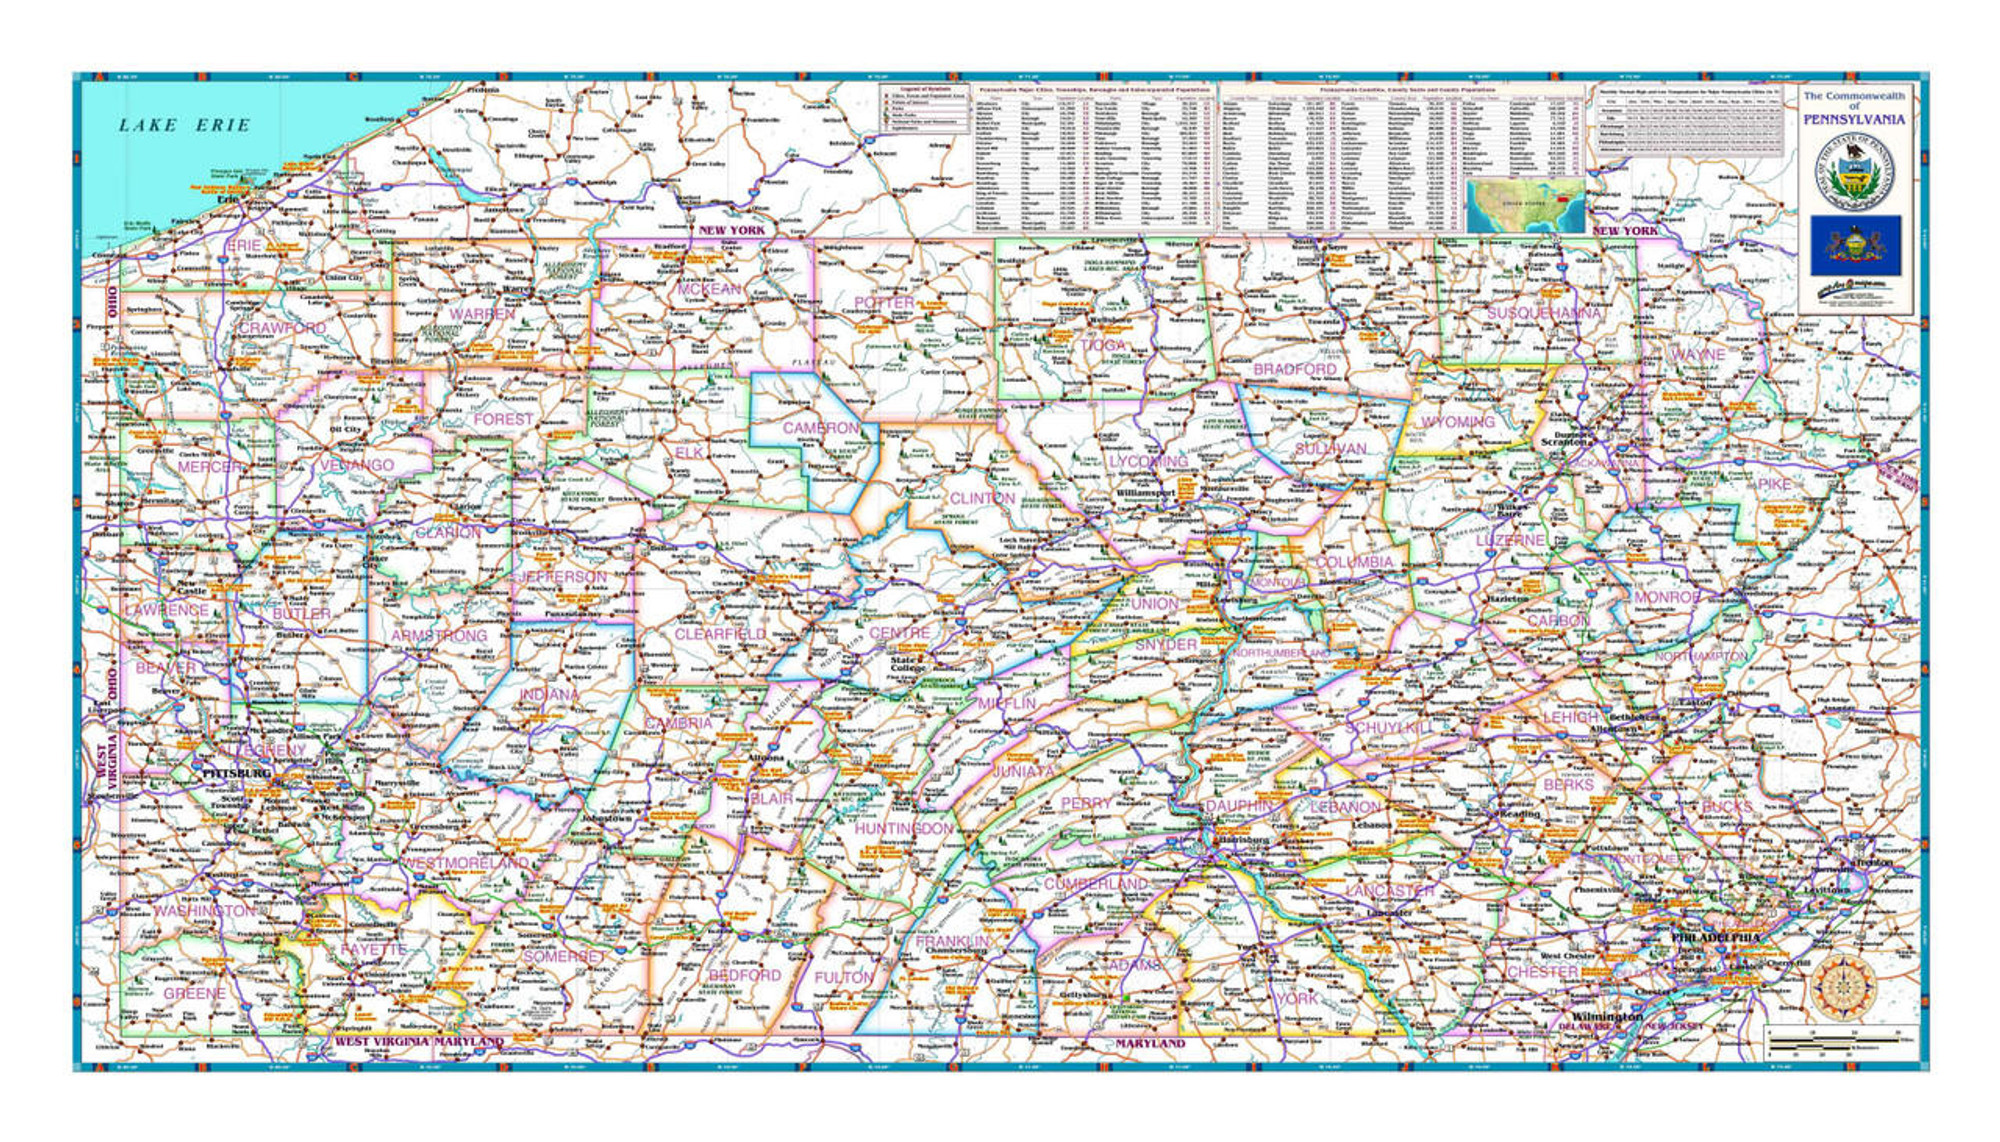 Pennsylvania Reference Map from Compart, image 2, World Maps Online